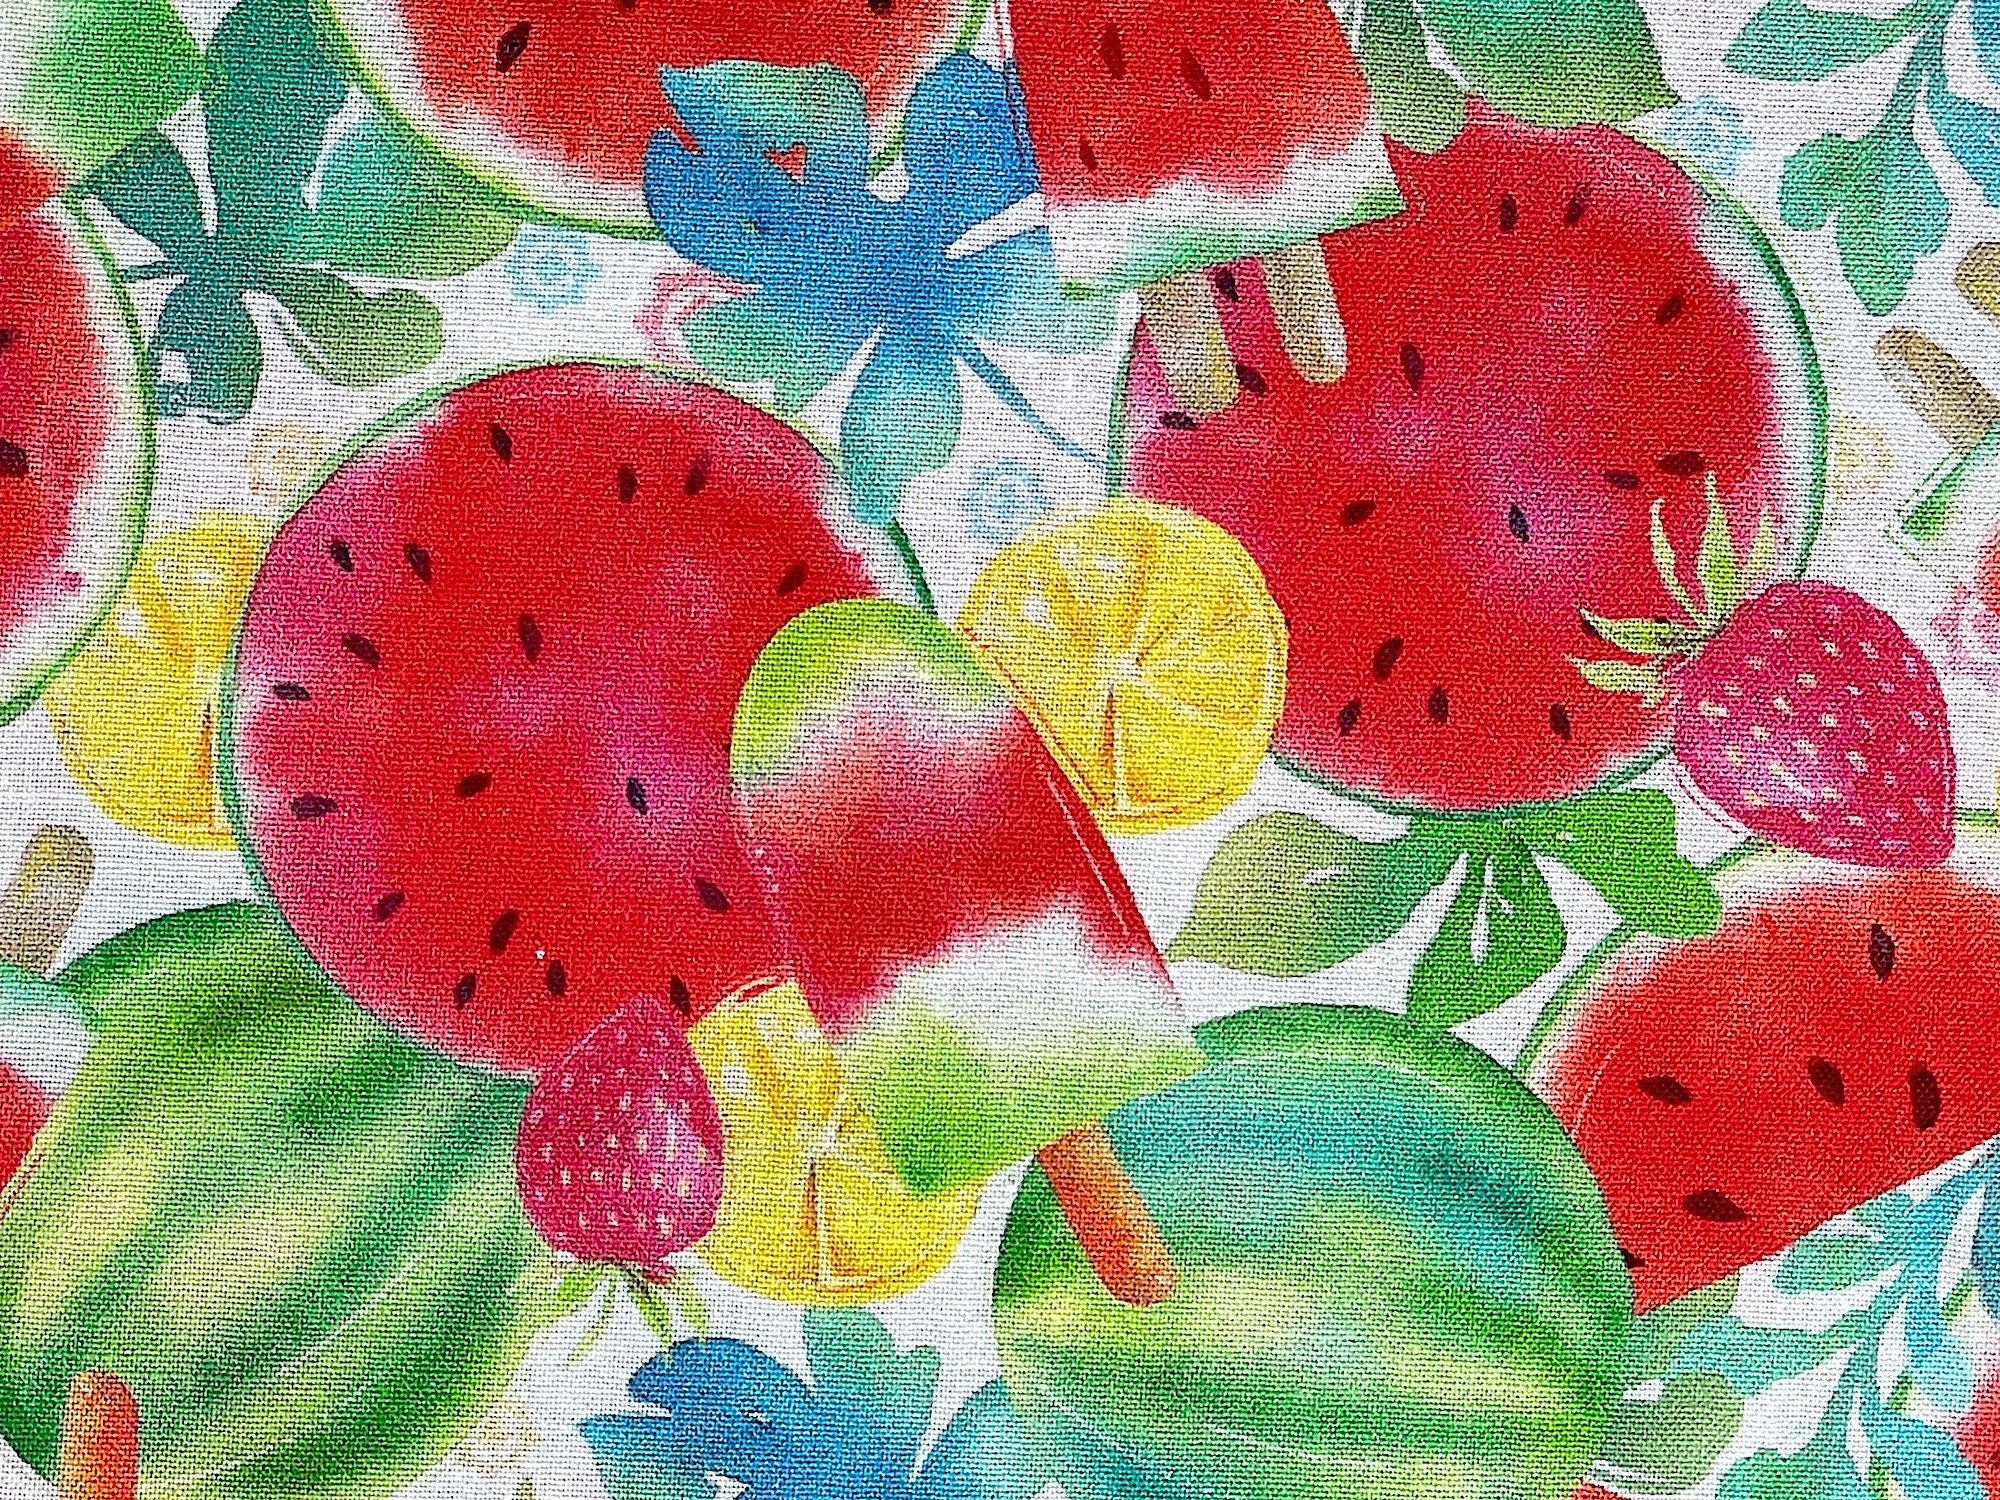 Close up of watermelons, popsicles and strawberries.